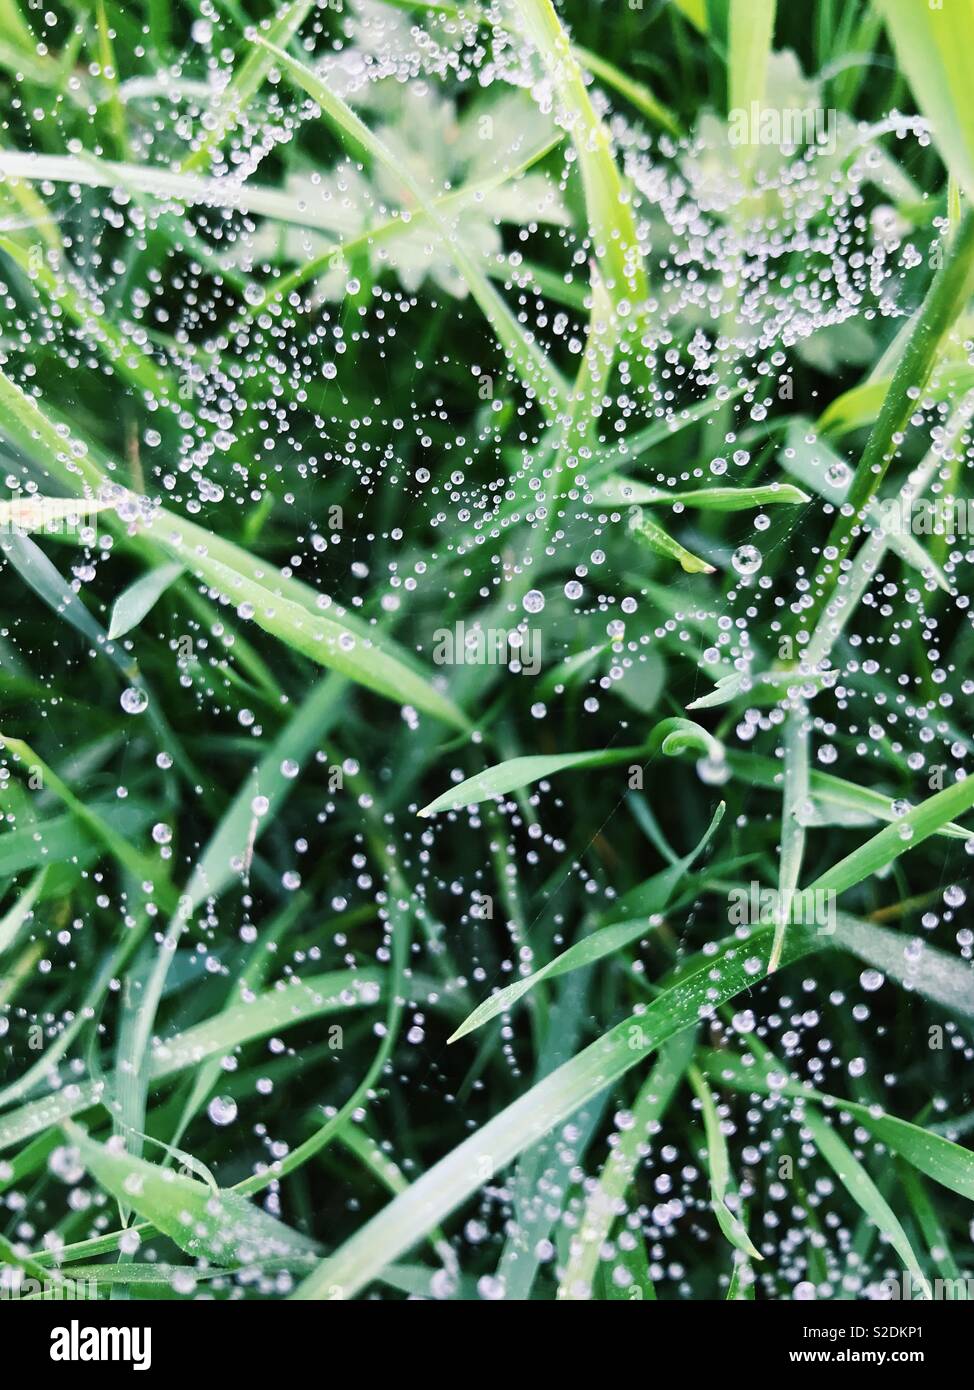 Morning dew on spider webs in the grass. Stock Photo